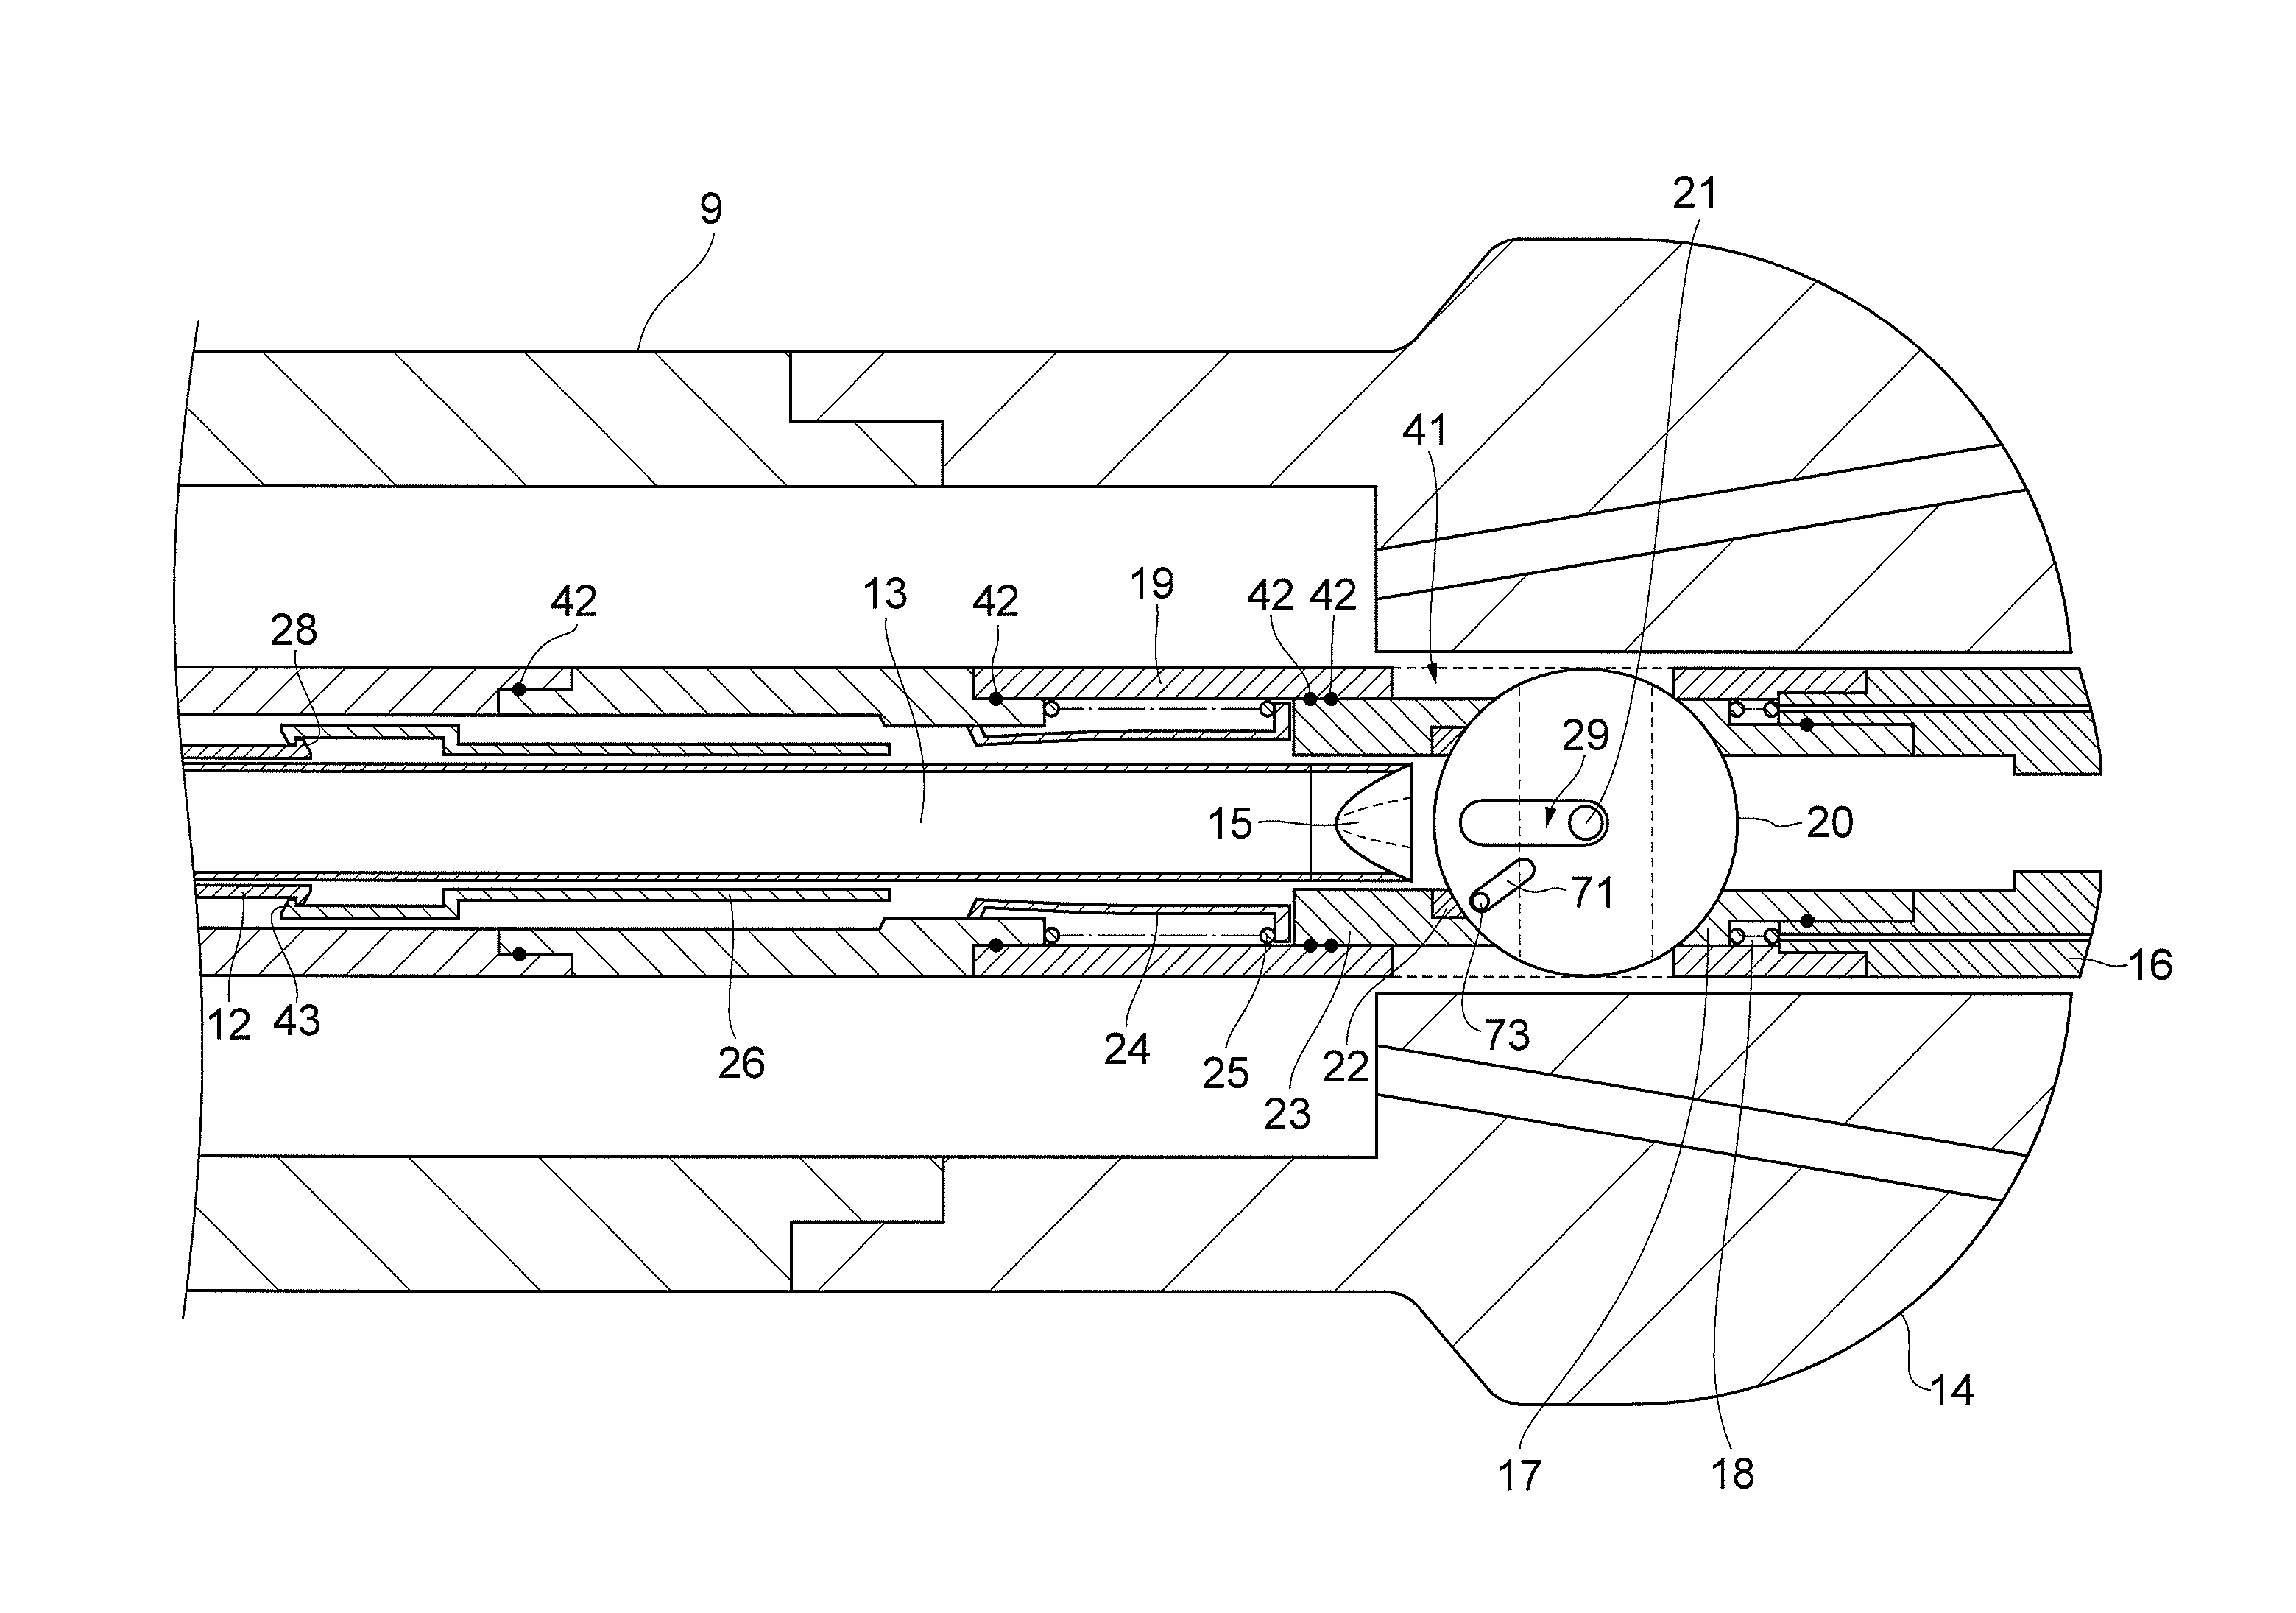 Core sampling apparatus and container transfer apparatus